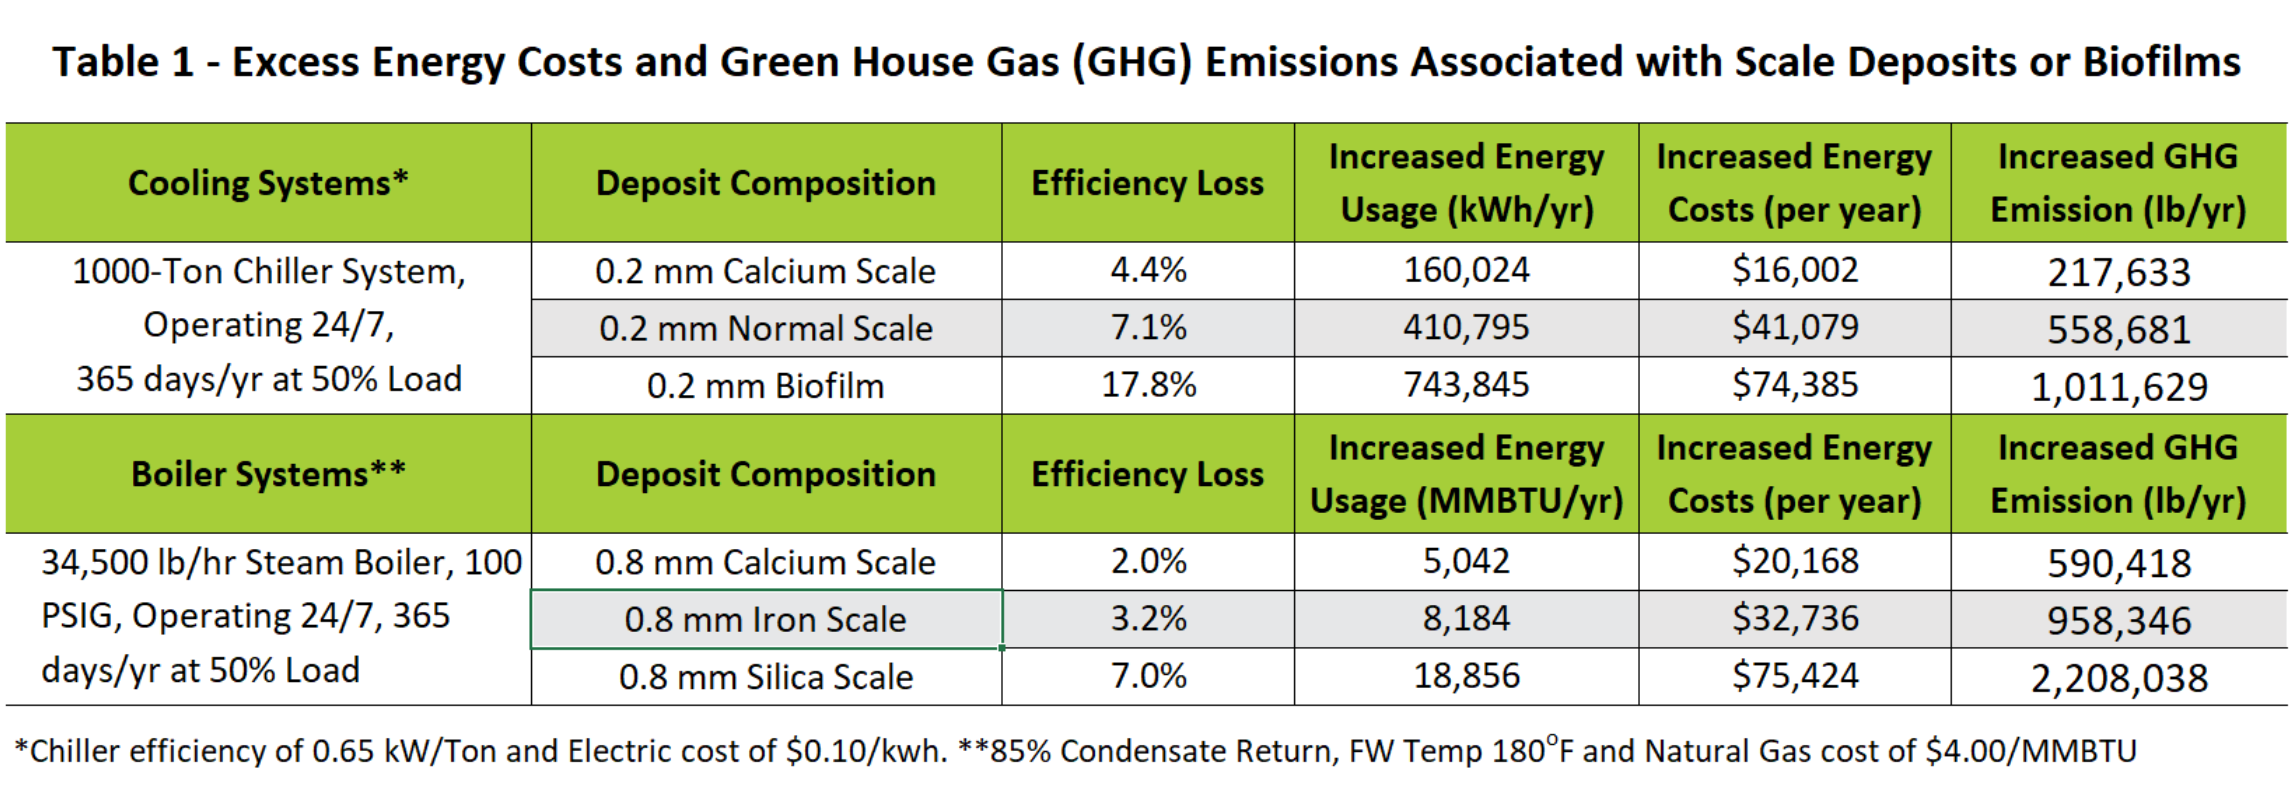 Table 1: Excess Energy Costs and Green House Gas (GHG) Emissions Associated with Scale Deposits or Biofilms